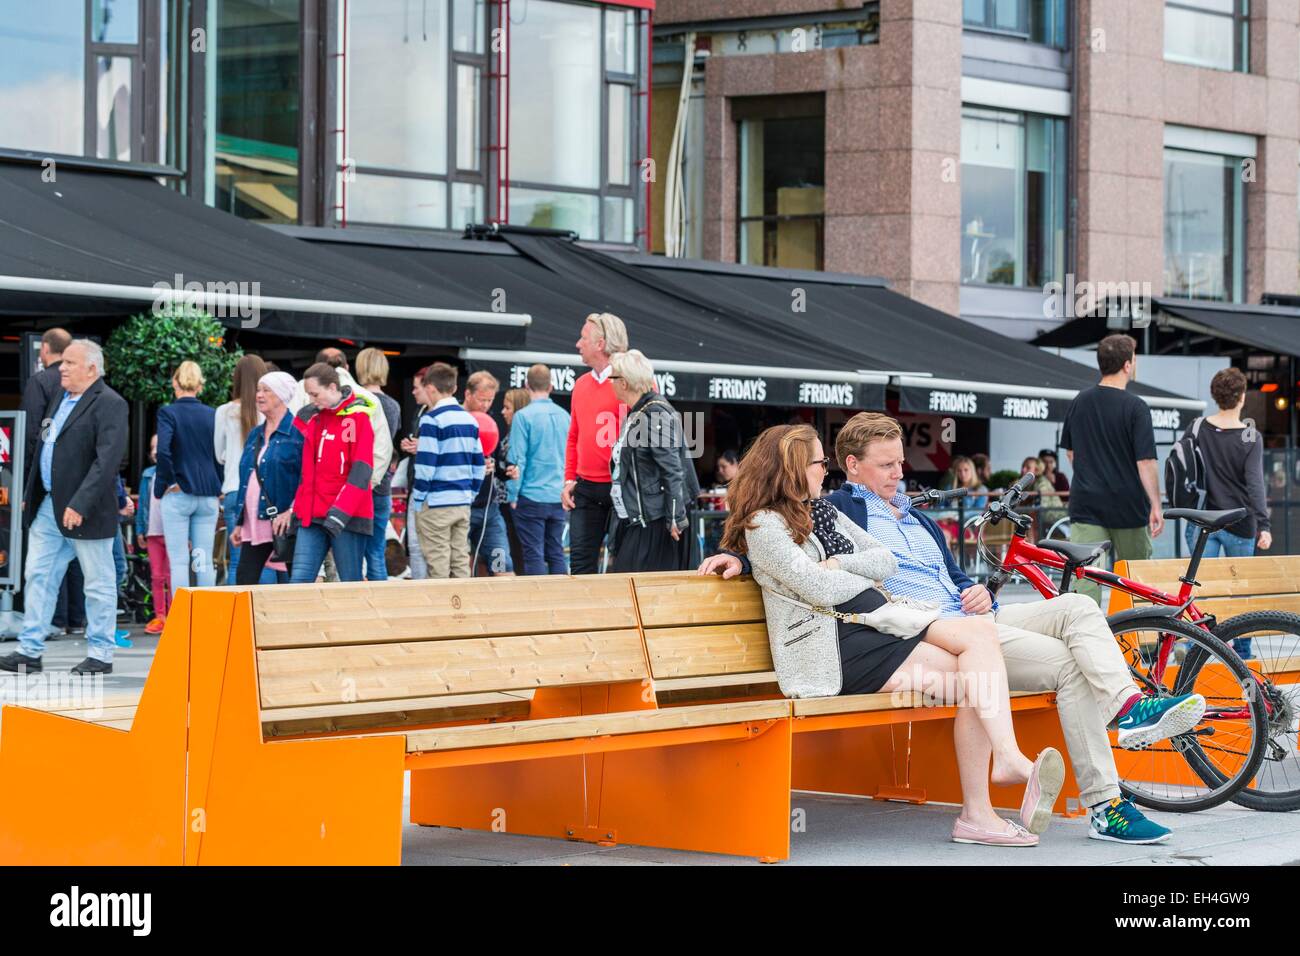 Norway, Oslo, Aker Brygge district, Stranden promenade built by the firm of architects LINK arkitektur Stock Photo